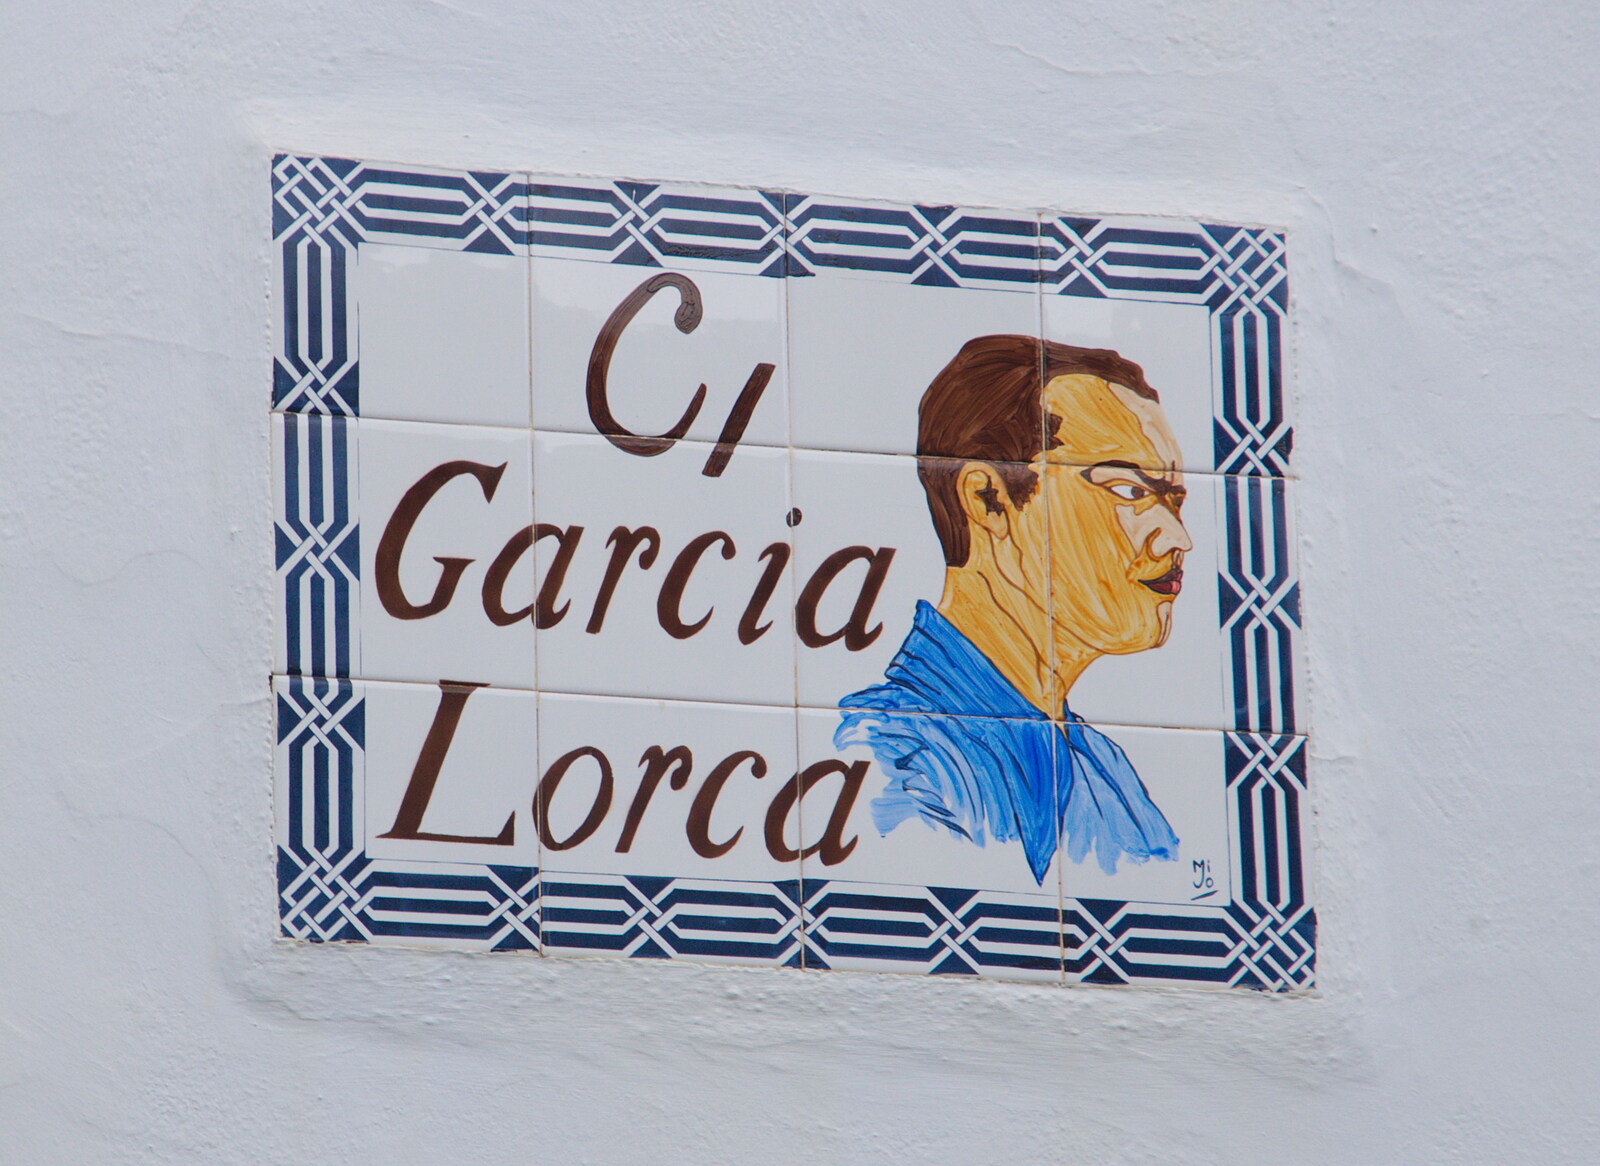 Funky tiled sign from The Caves of Nerja, and Frigiliana, Andalusia, Spain - 18th April 2019